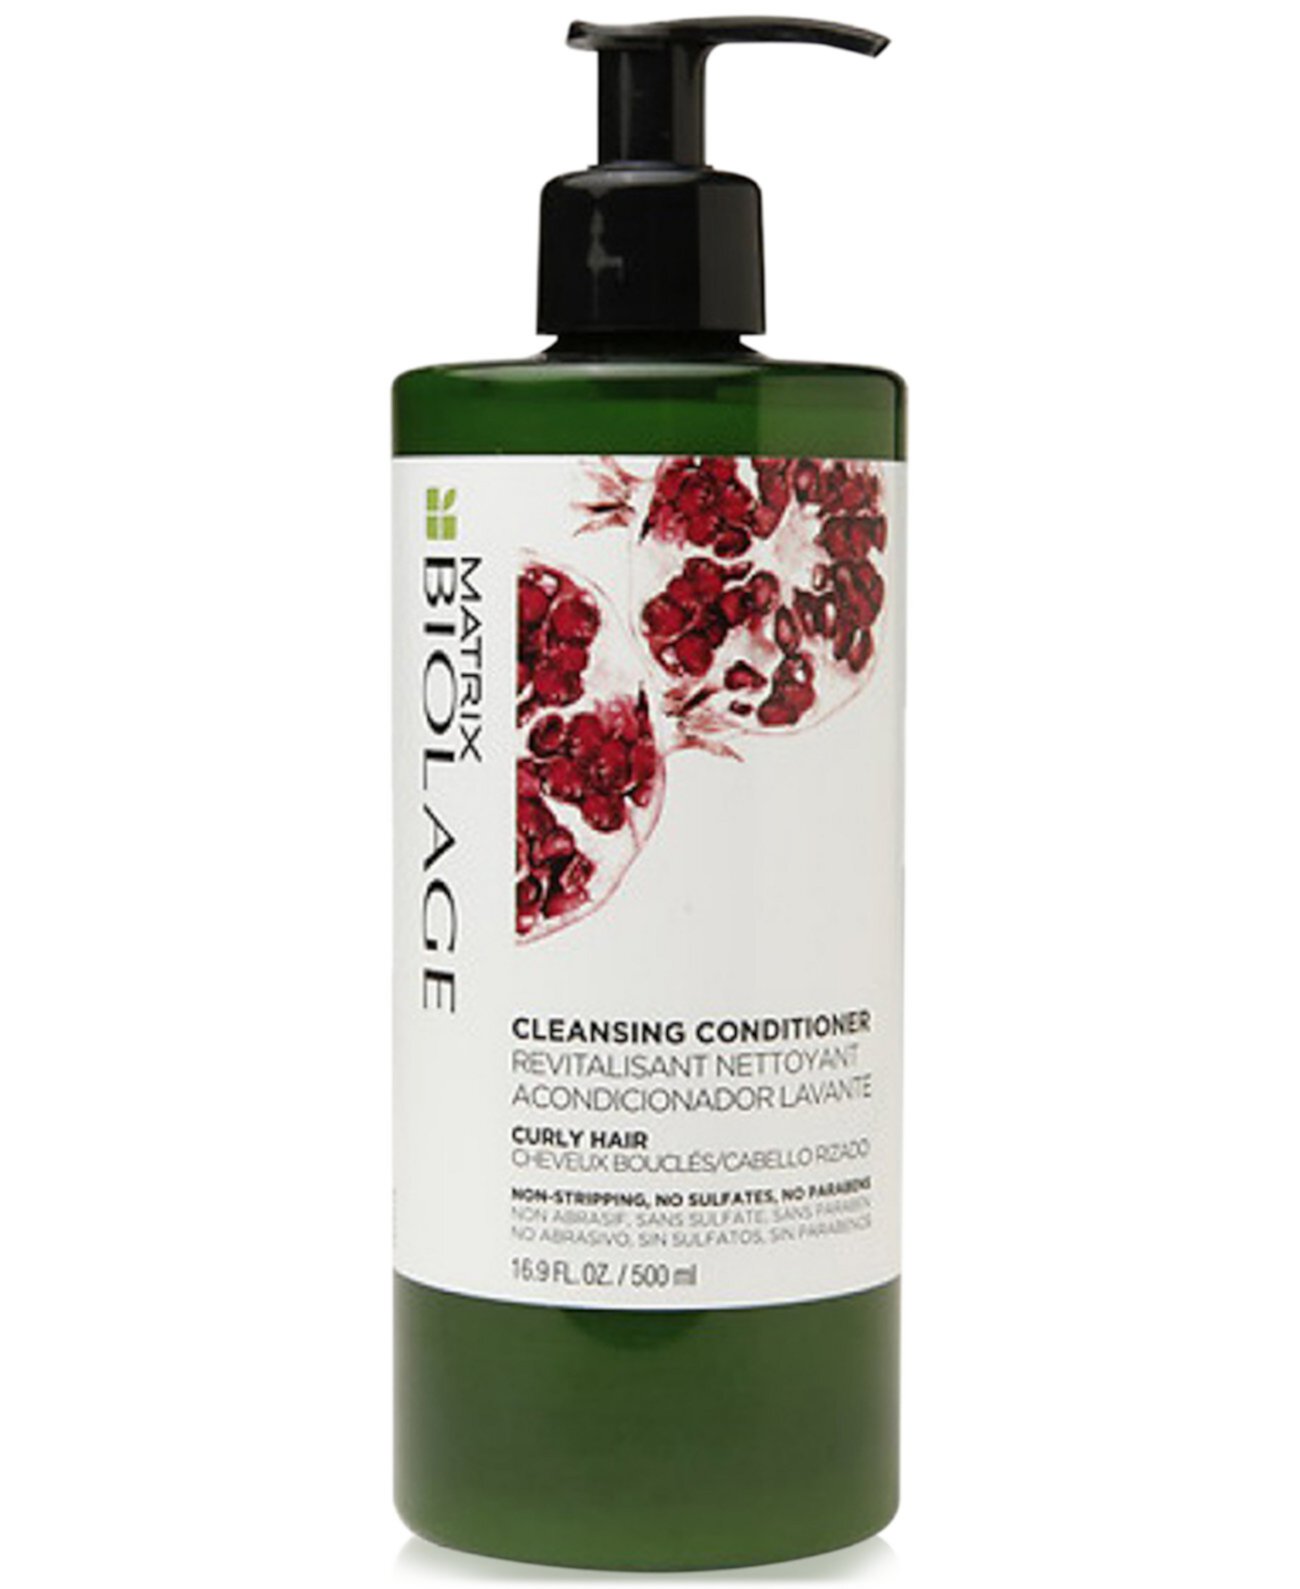 Biolage Cleansing Conditioner For Curly Hair, 16.9-oz., from PUREBEAUTY Salon & Spa Matrix